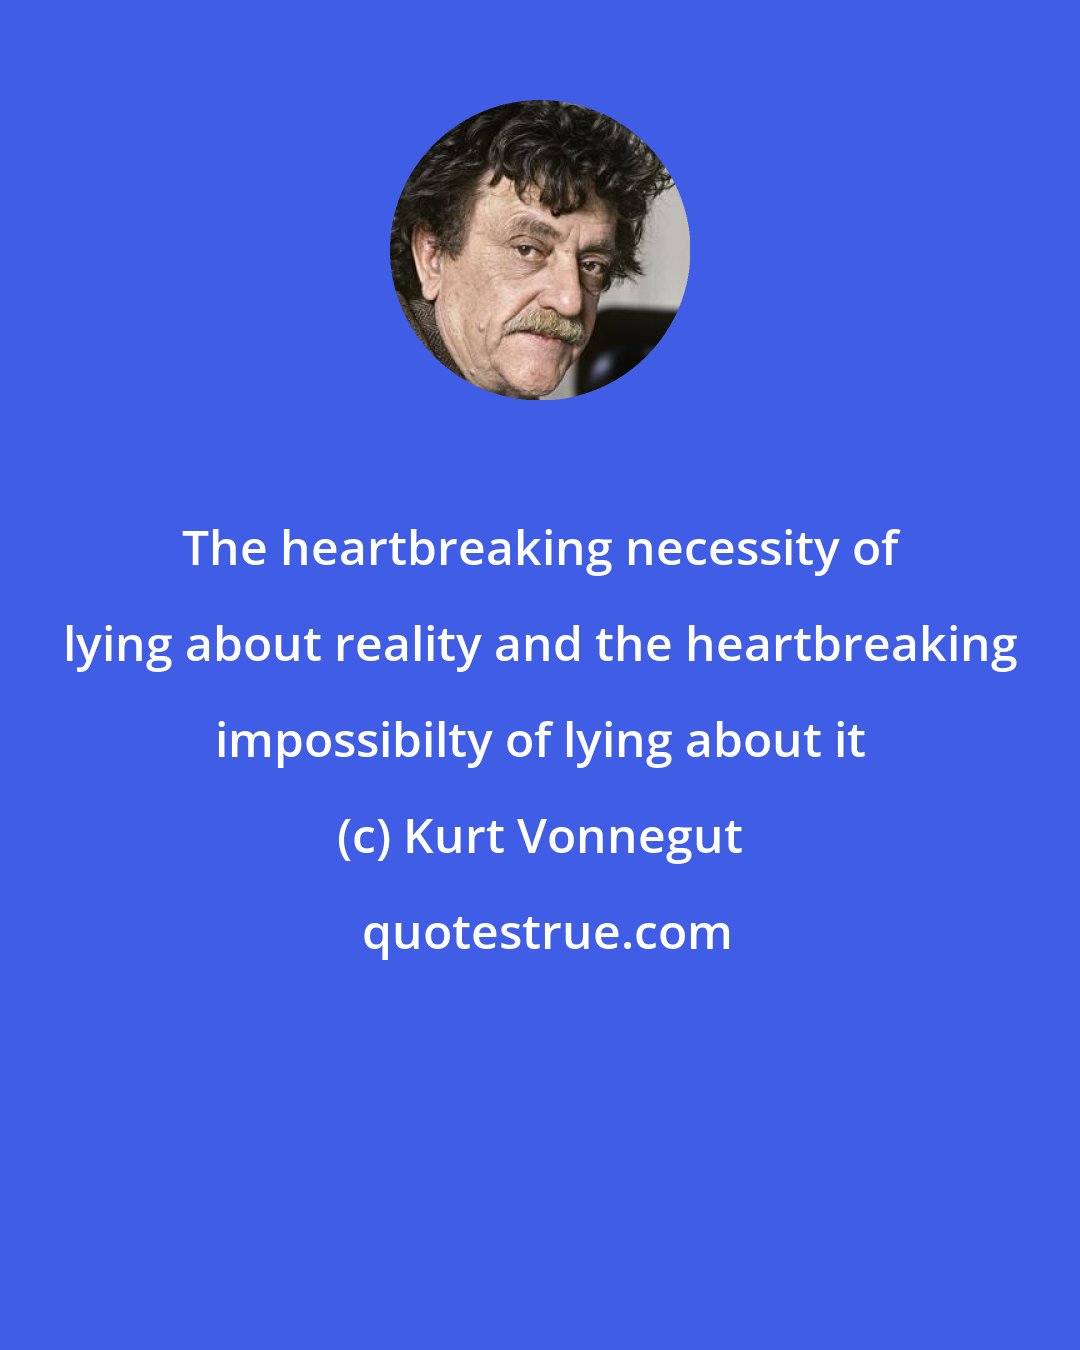 Kurt Vonnegut: The heartbreaking necessity of lying about reality and the heartbreaking impossibilty of lying about it